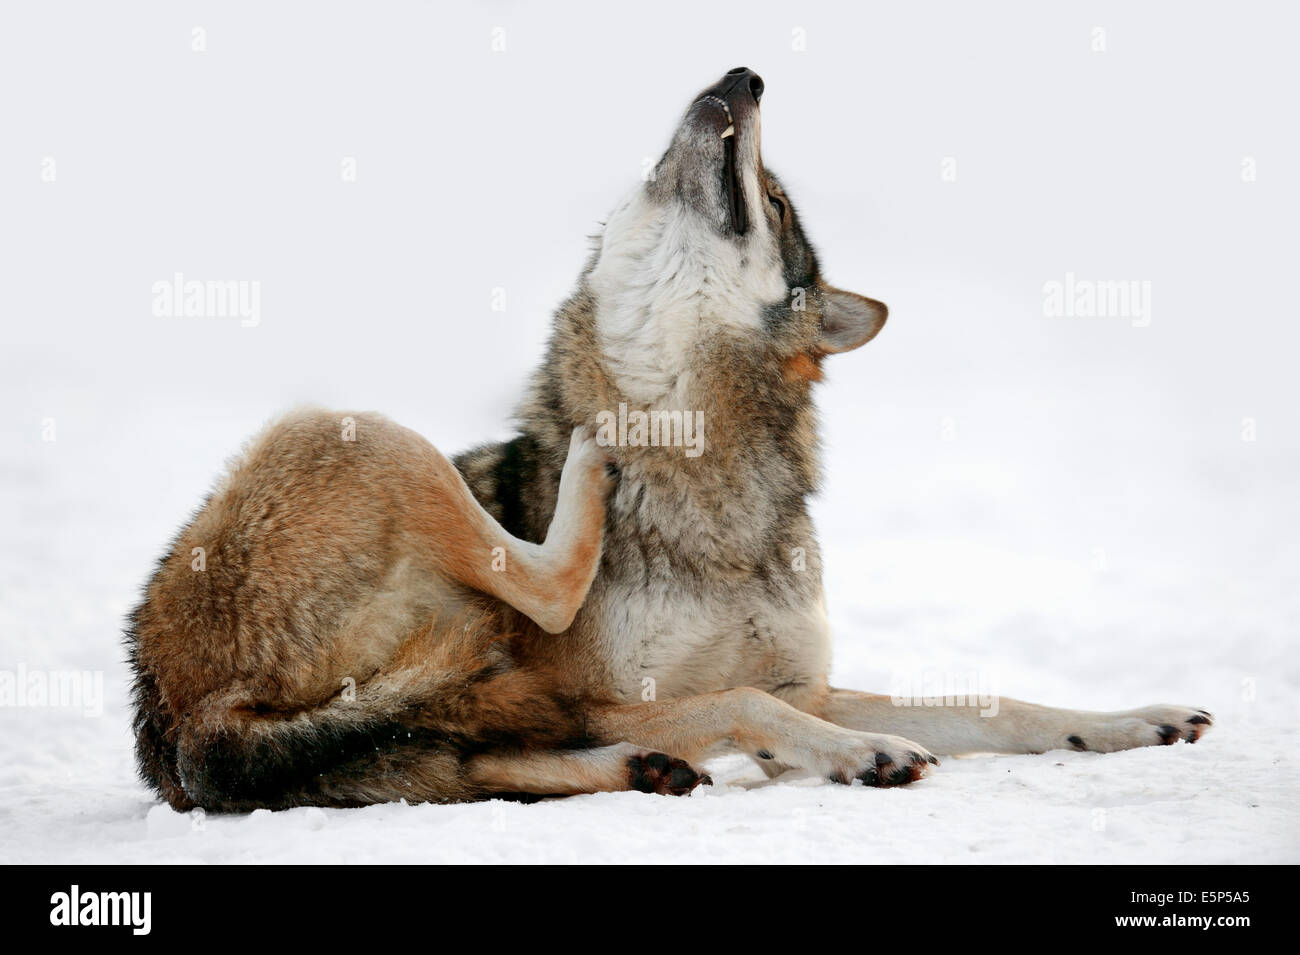 Lupo (Canis lupus) in inverno Foto Stock